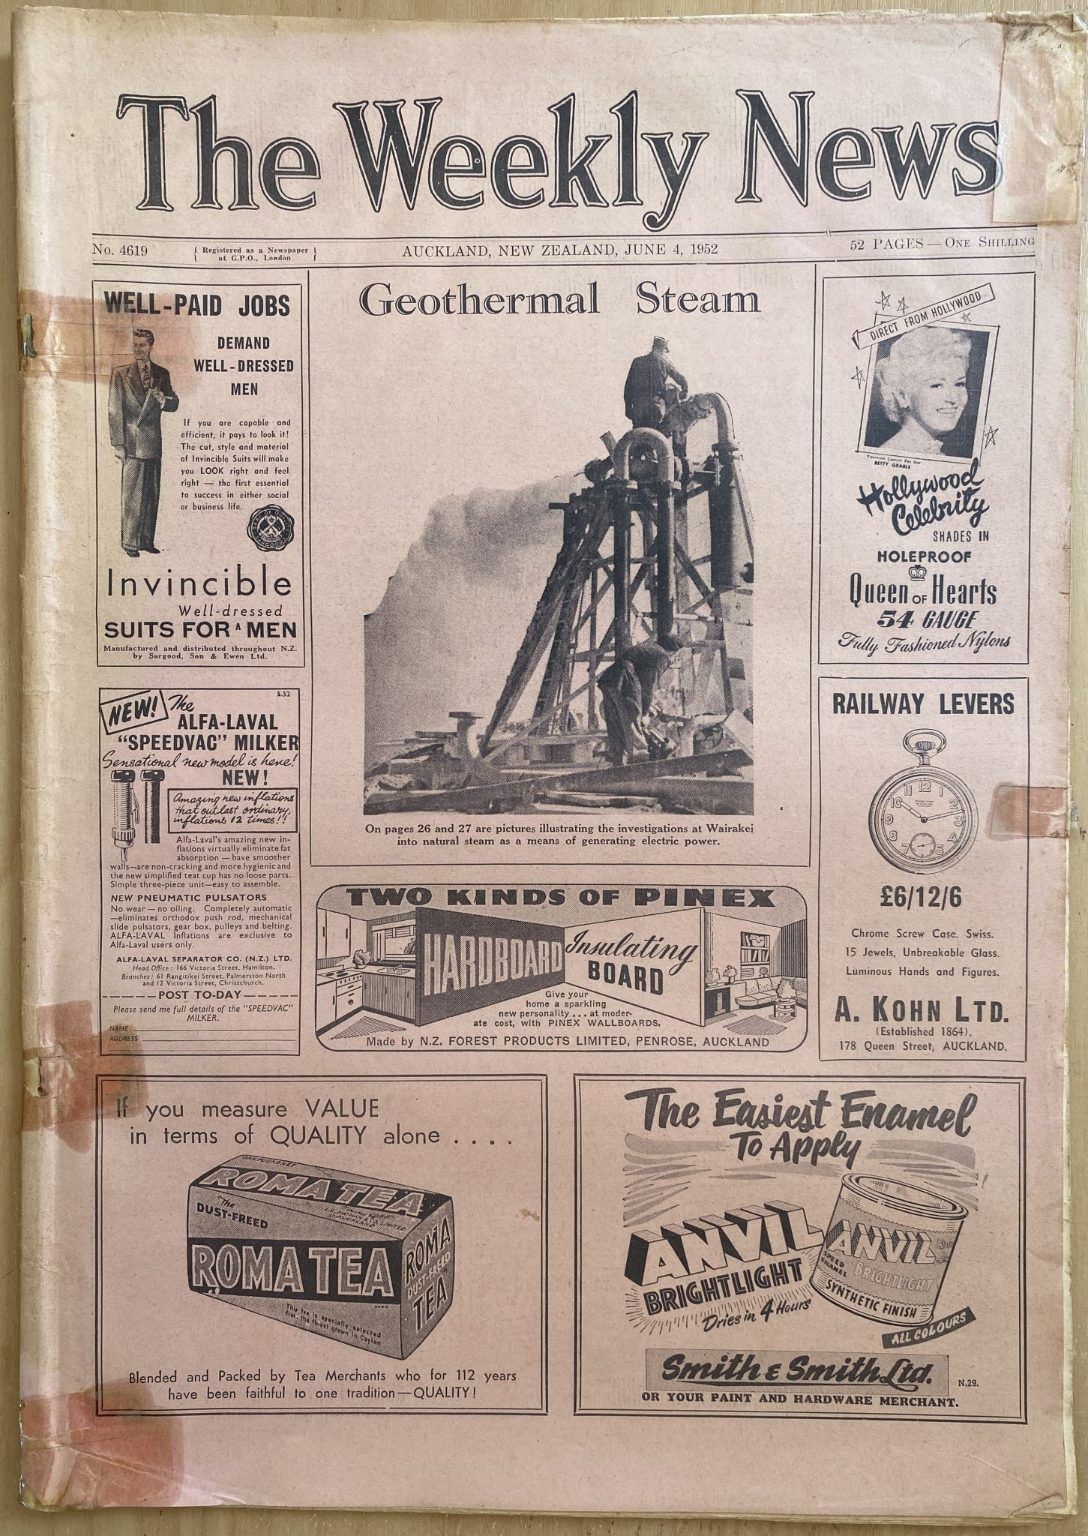 OLD NEWSPAPER: The Weekly News - No. 4619, 4 June 1952